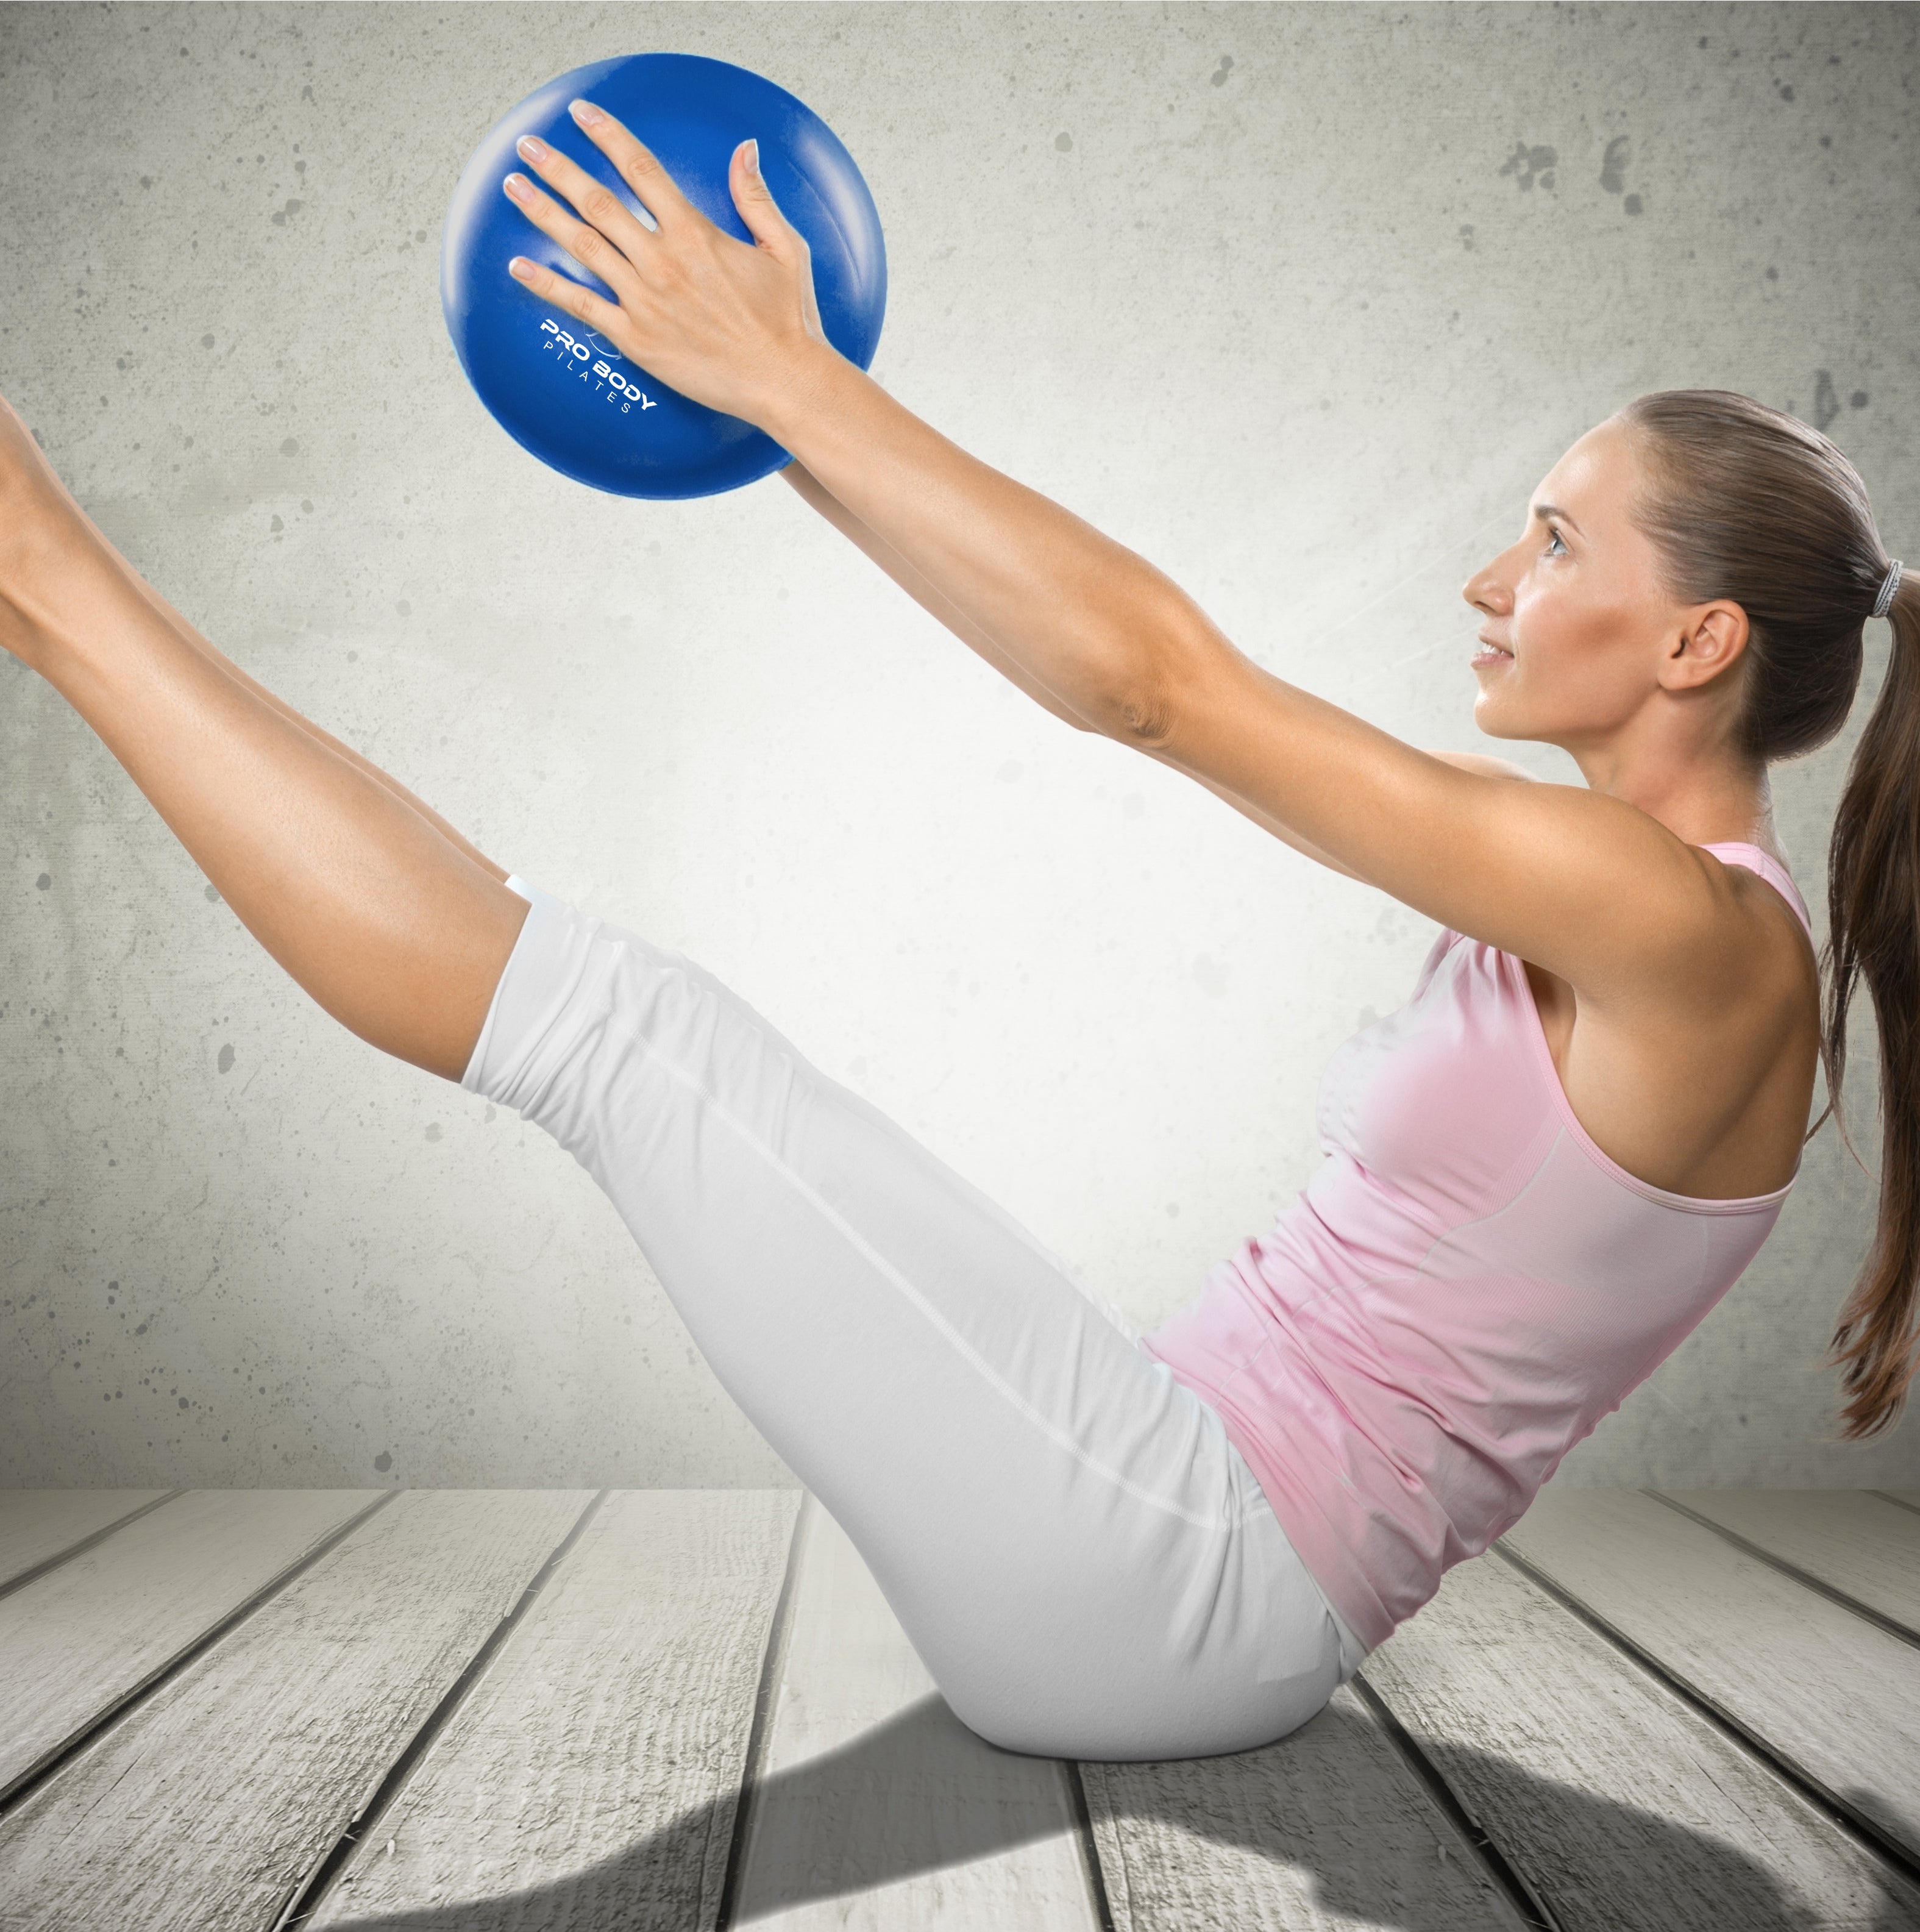 Mini Exercise Ball for Stability, Fitness, Pilates, Yoga, and